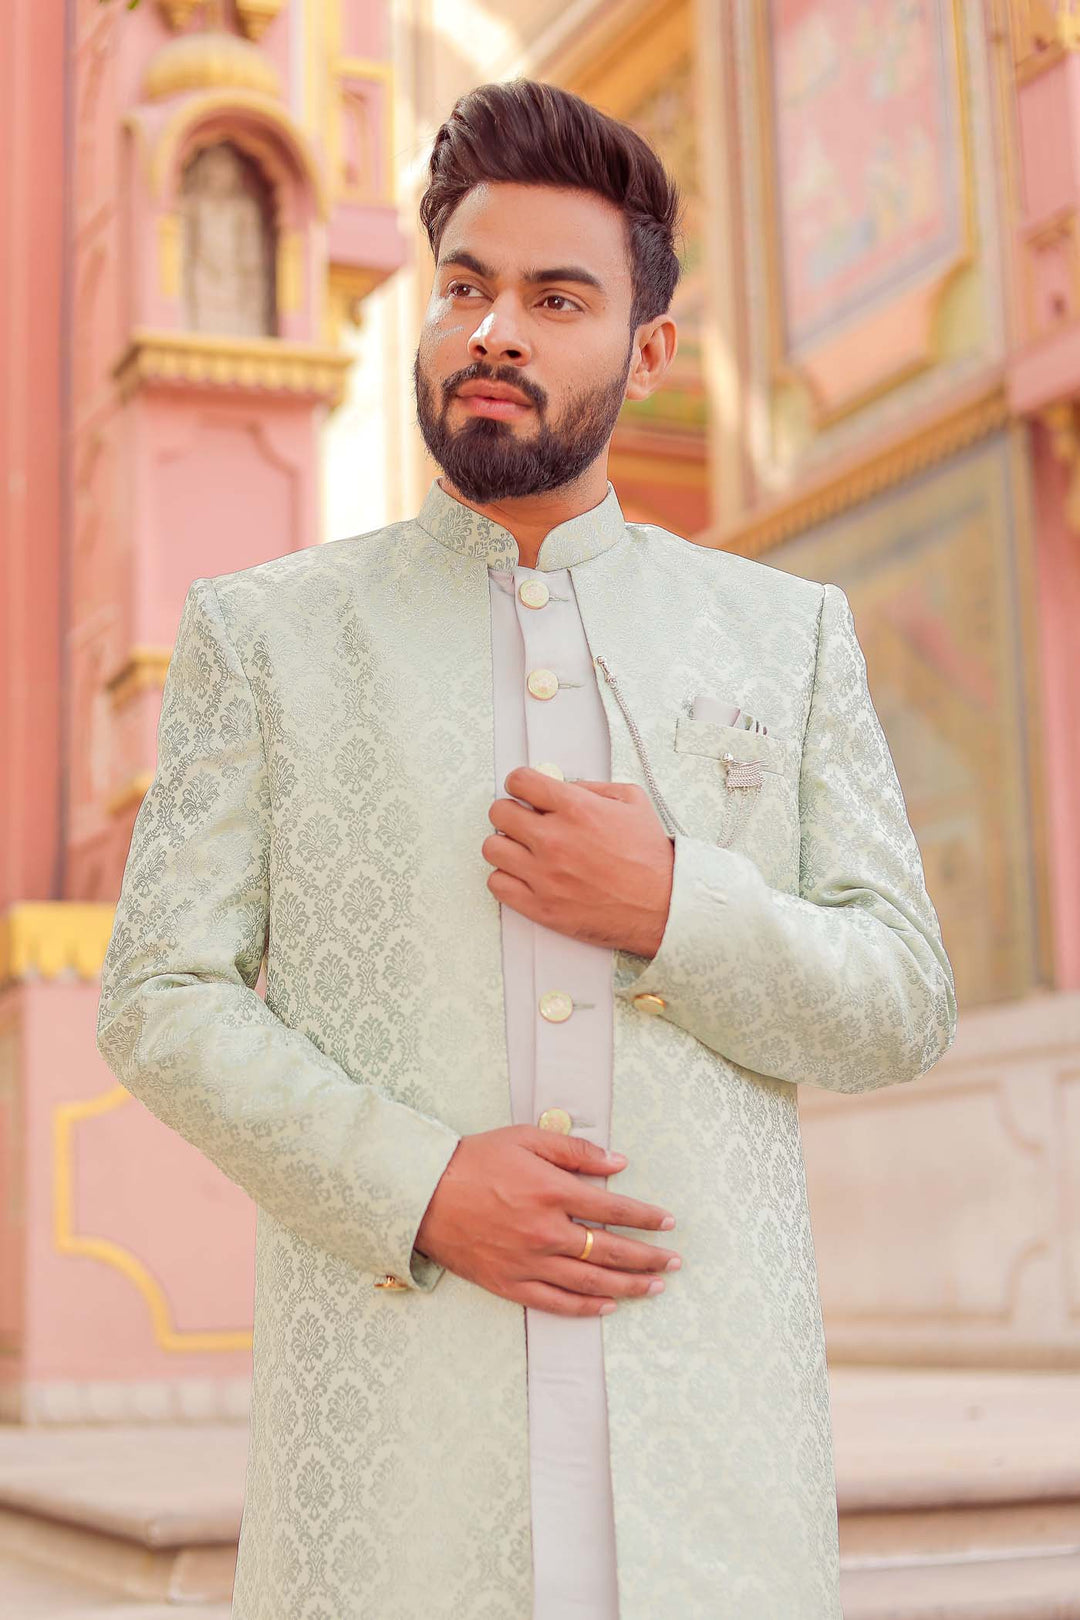 Mint Green Brocade Silk Jacket Style Indo-wester Suit.